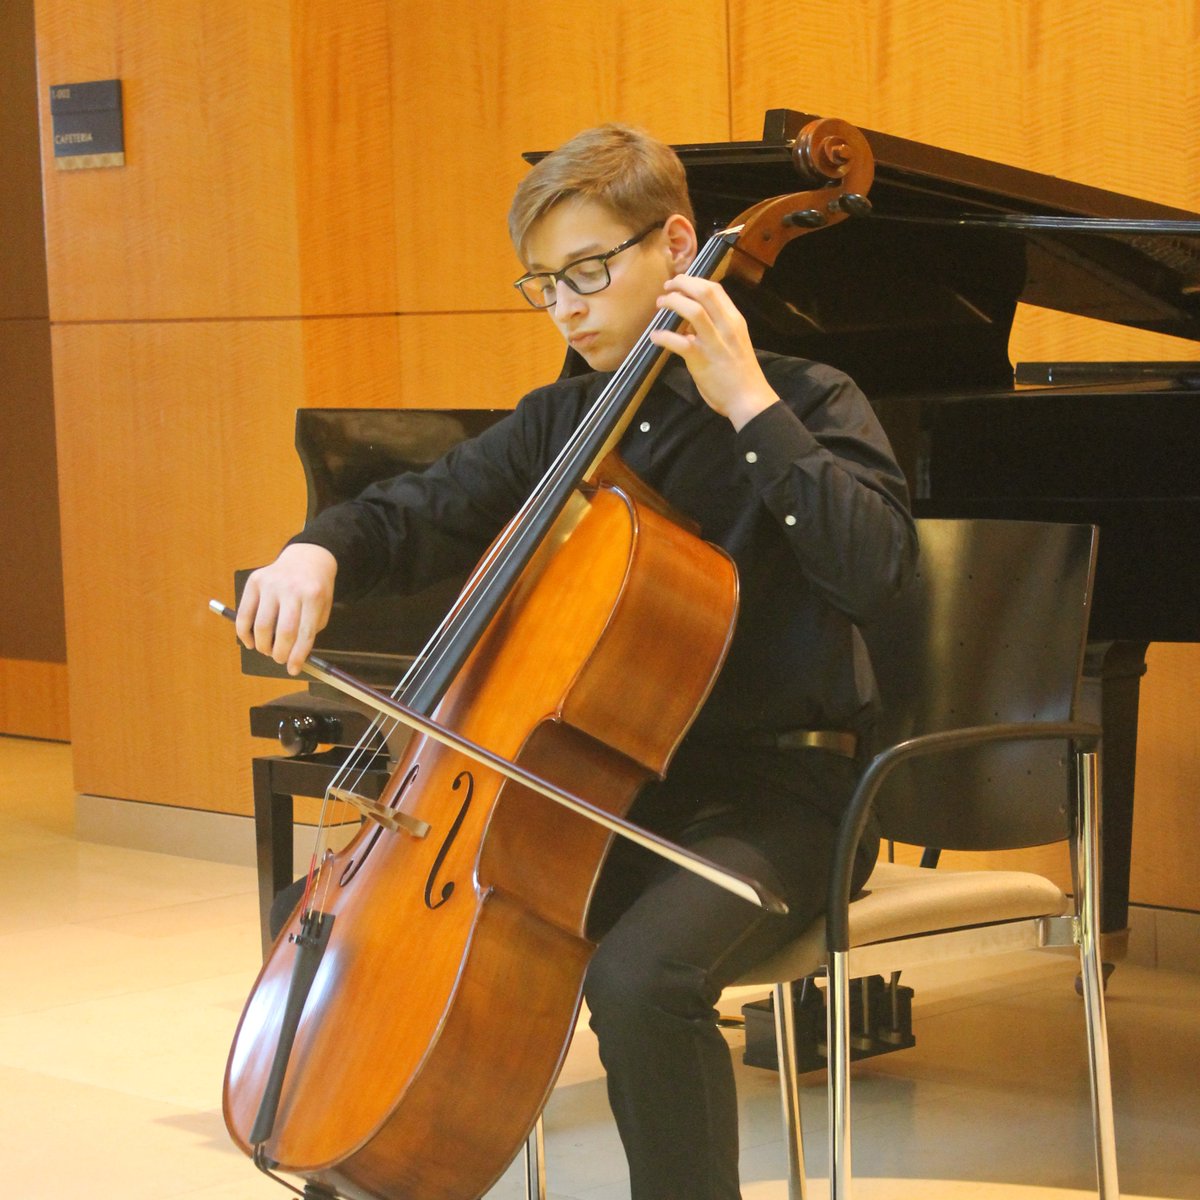 Congratulations to David Fiorito for completing 100 days of consecutive practice! David studies cello under the studio of Leo Soeda and we know Leo is very proud of his student's accomplishment. Keep up the good work and congratulations again on this milestone!